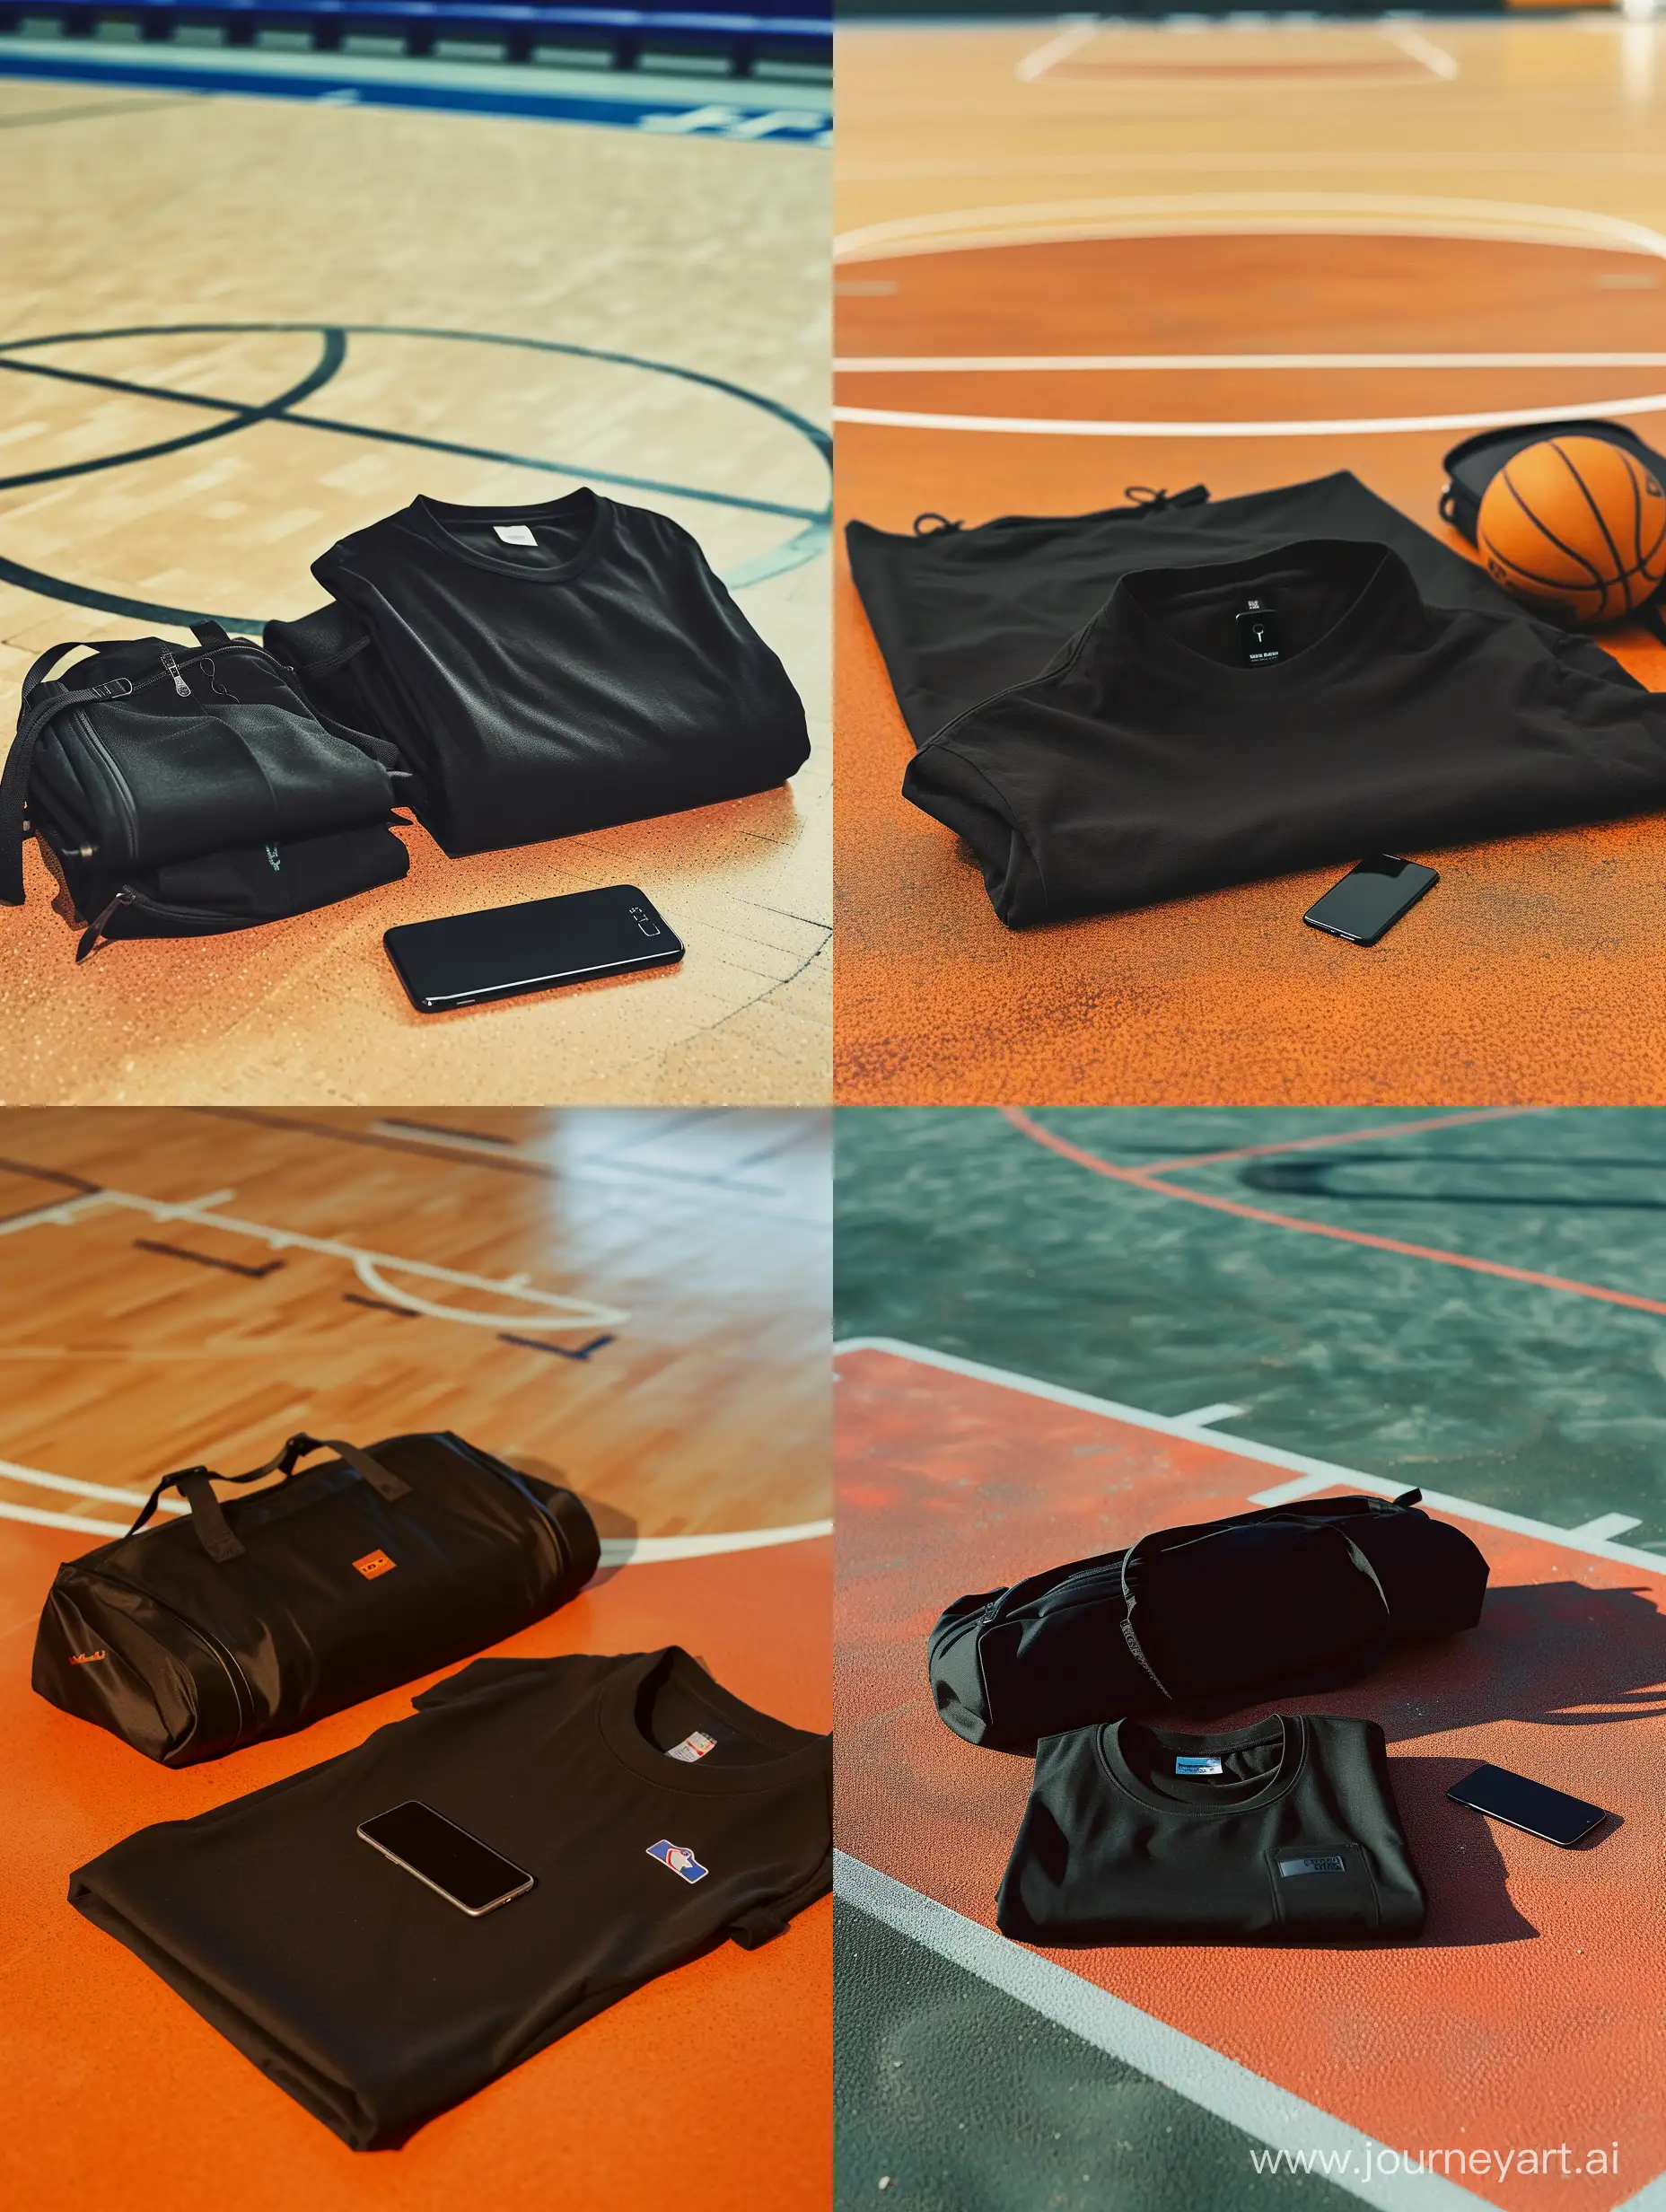 Folded black t-shirt, mobile phone and and black sports bag on a basketball court.